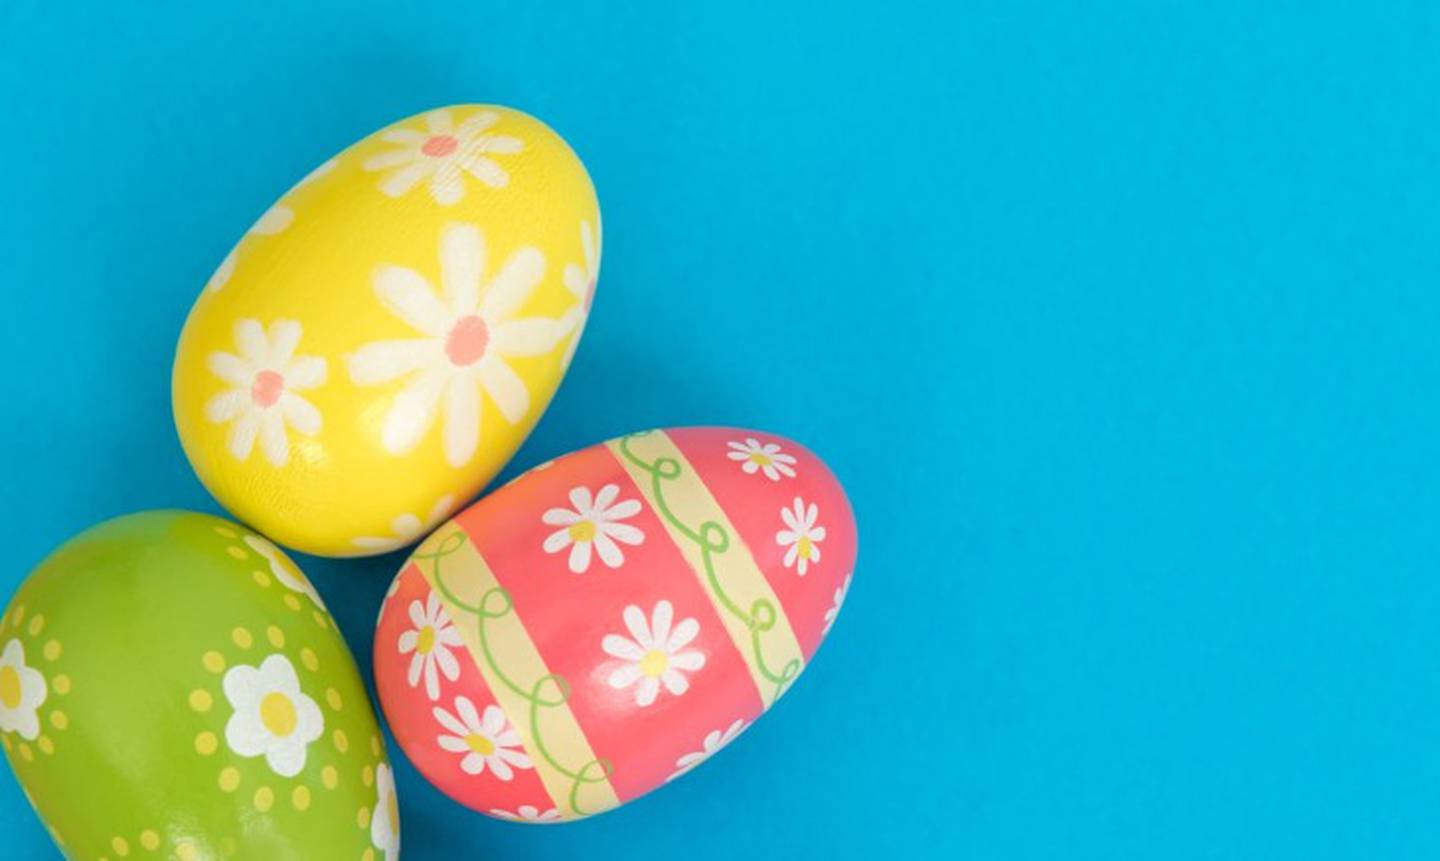 Why are chocolate eggs delivered on Easter Sunday?